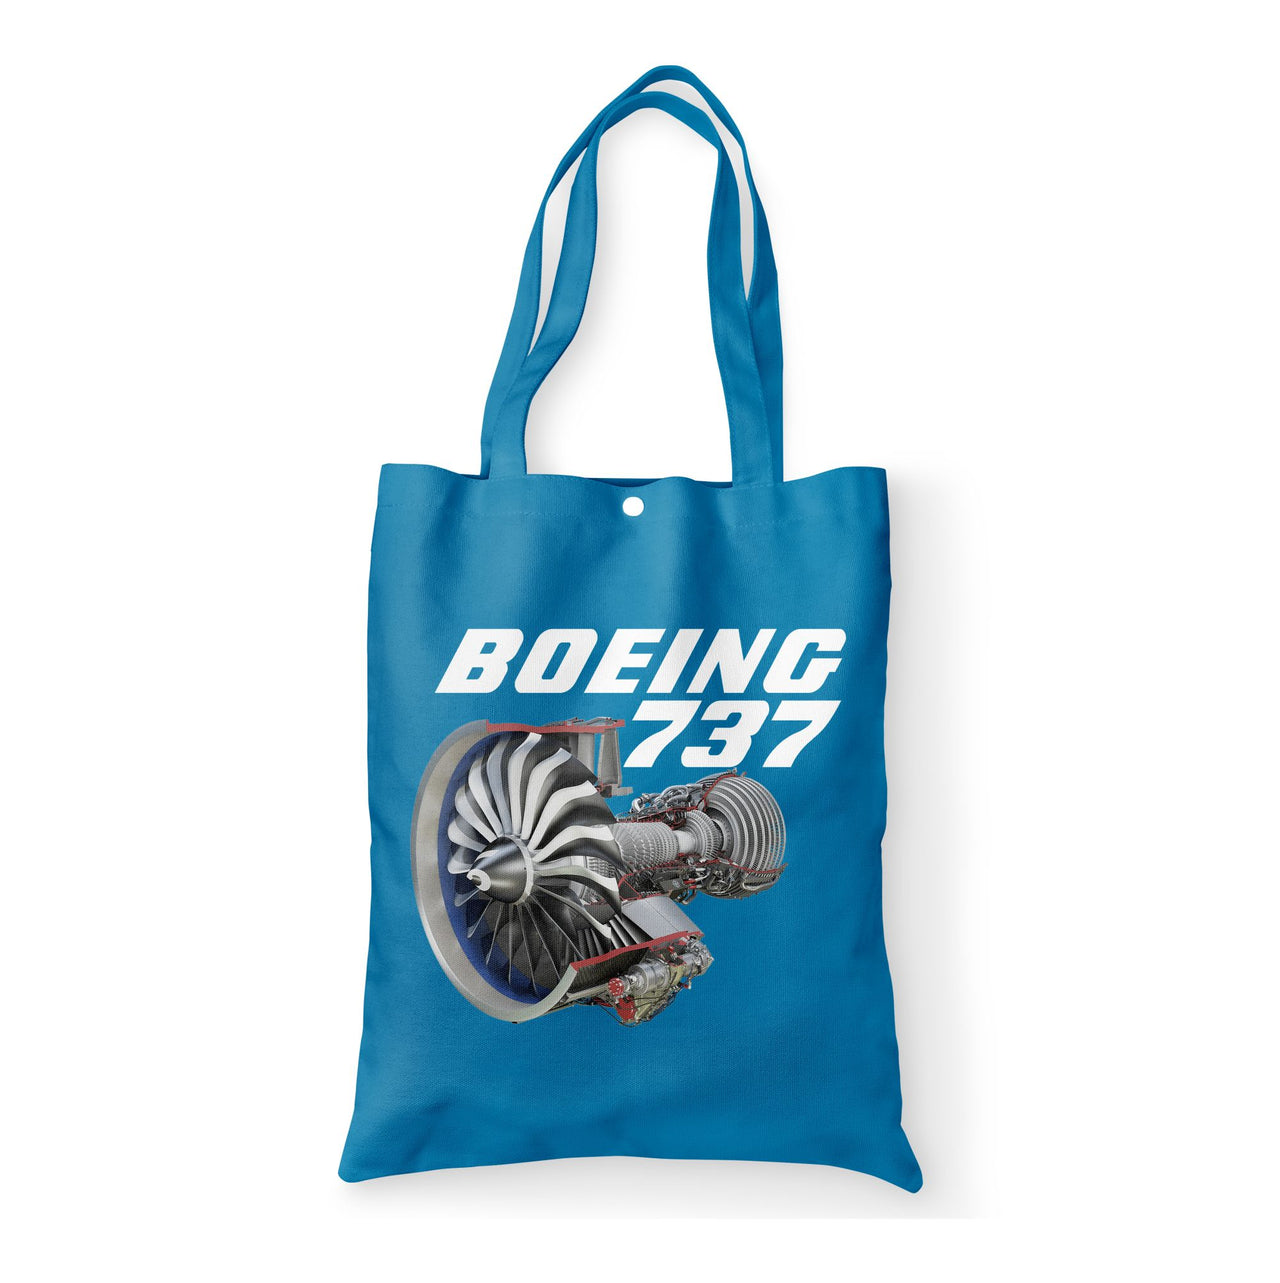 Boeing 737+Text & CFM LEAP-1 Engine Designed Tote Bags